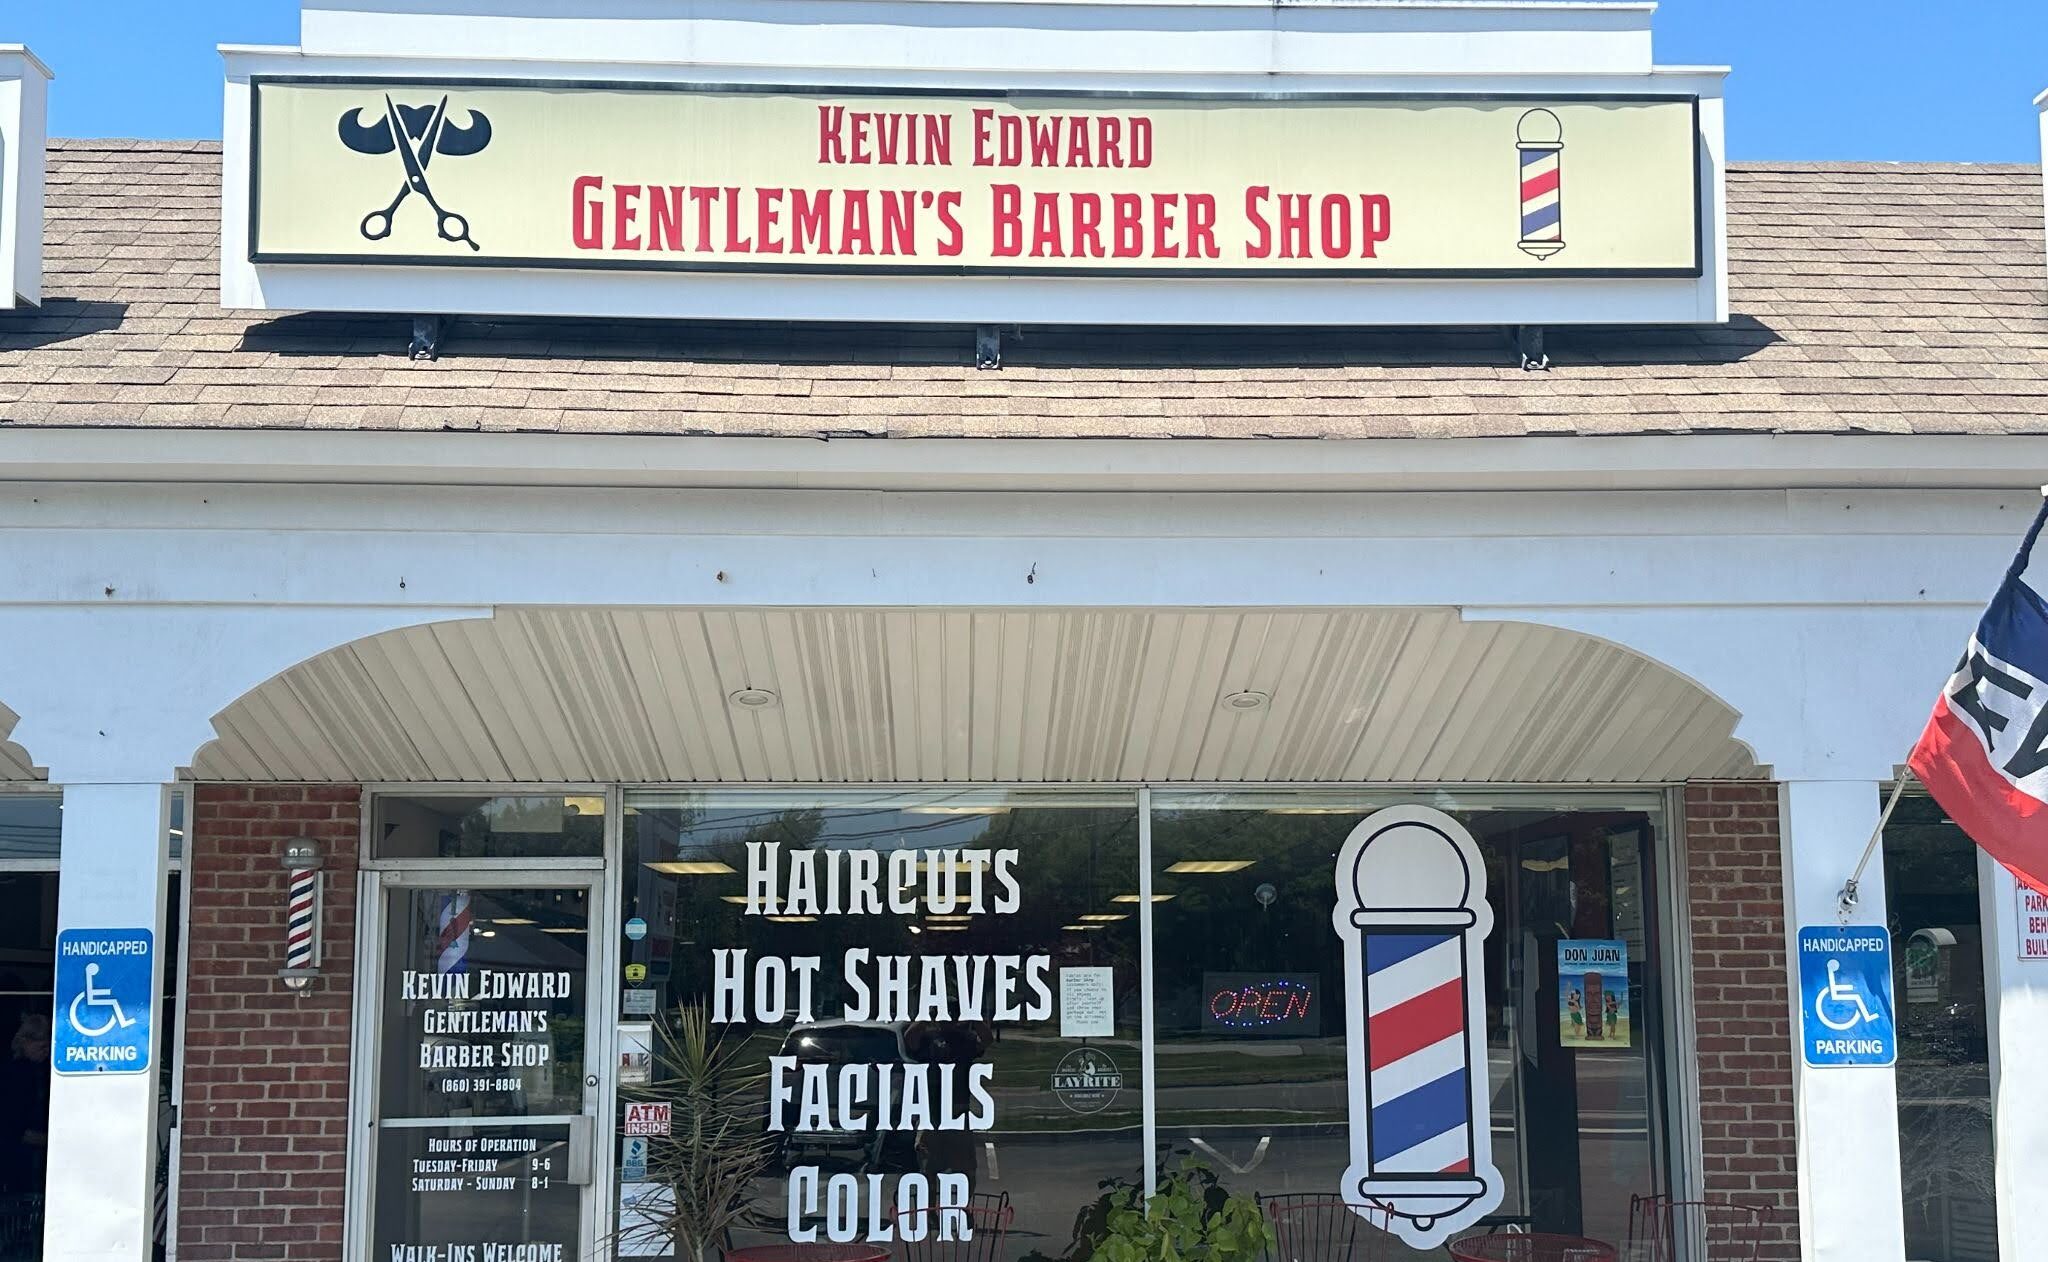 Seaside Barbershop Uses Funding to Hire Top Talent and Grow the Business Image